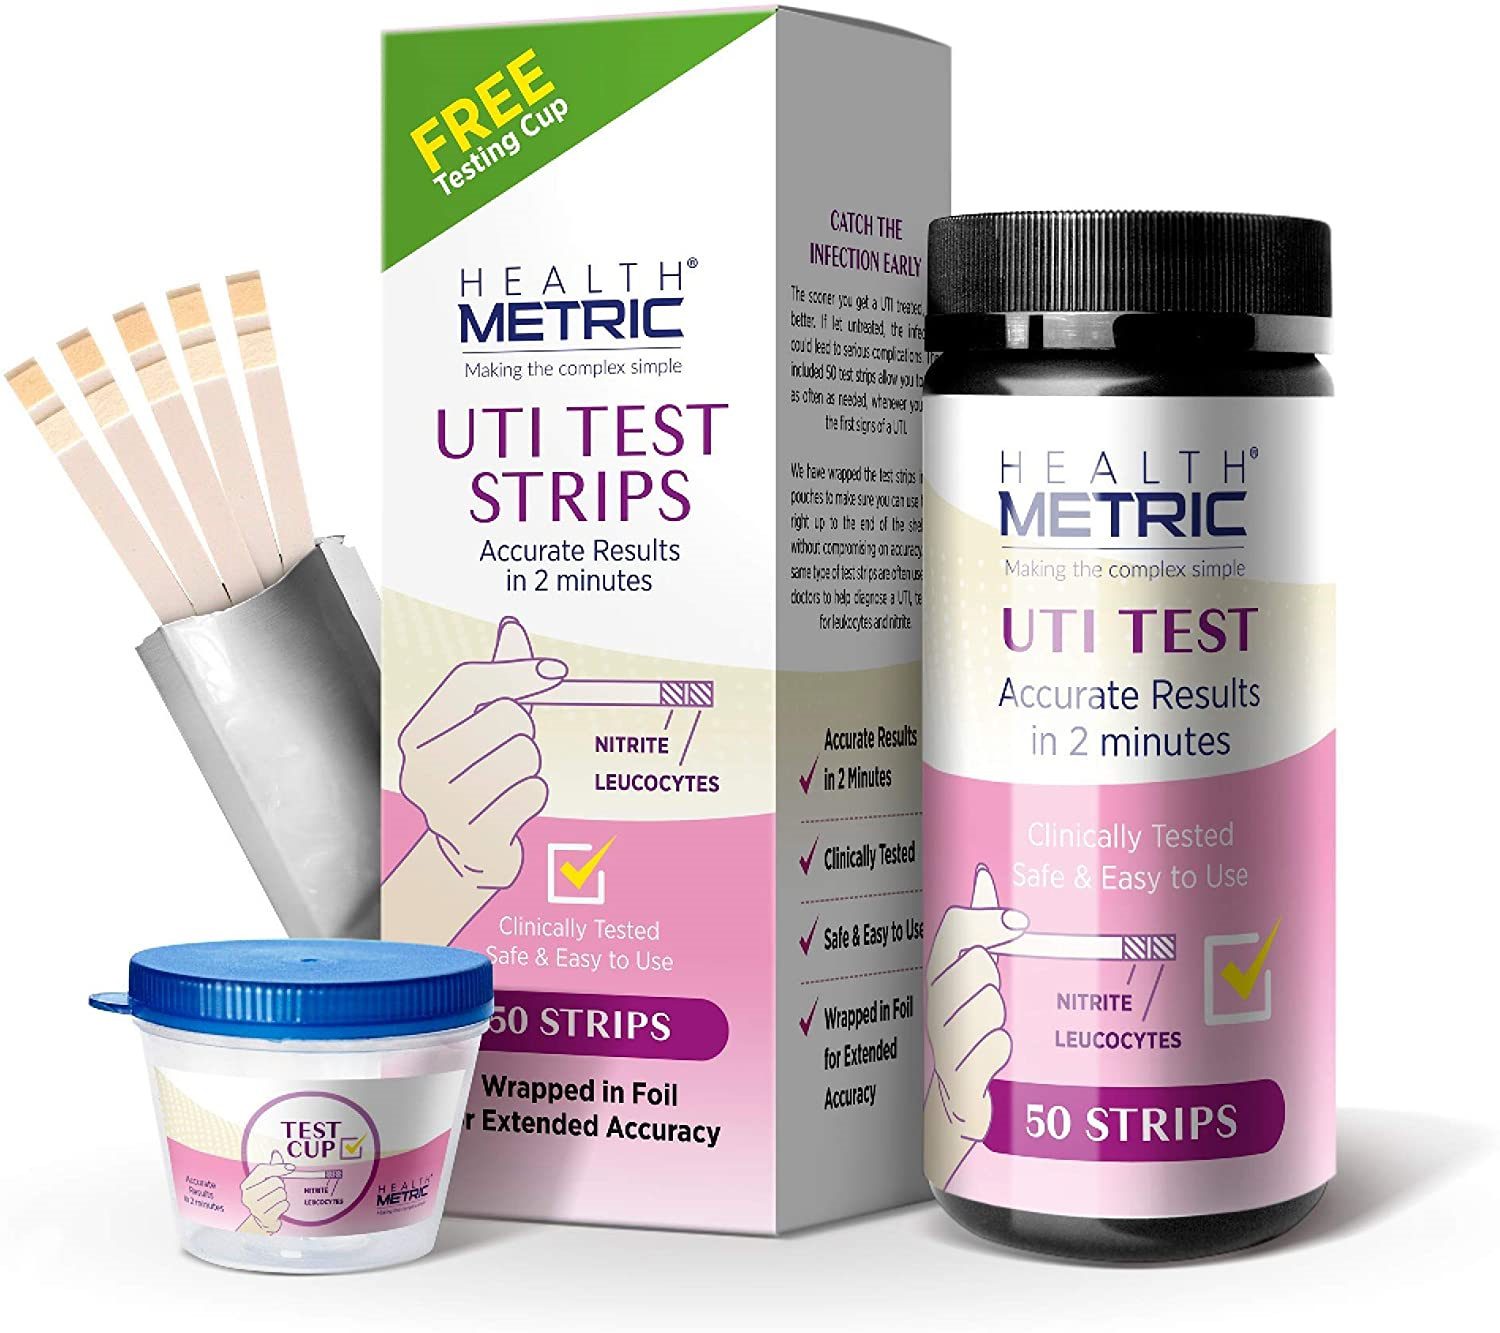 UTI Test Strips for Women & Men - Easy to Use at Home Urinary Tract Infection Testing Kit